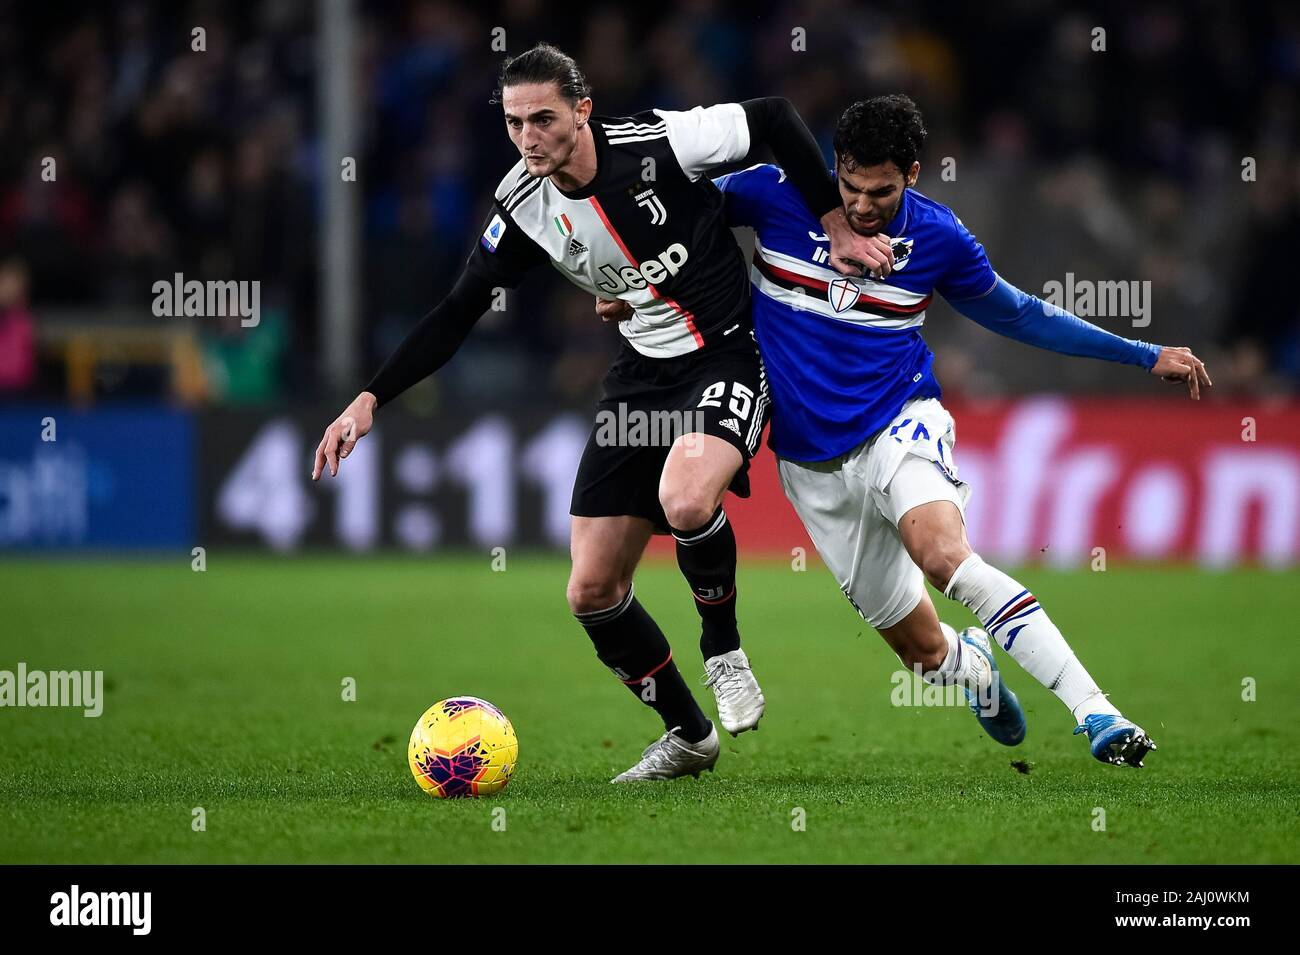 Genoa, Italy. 18th December, 2019: Adrien Rabiot (L) of Juventus FC is challenged by Mehdi Leris of UC Sampdoria during the Serie A football match between UC Sampdoria and Juventus FC. Juventus FC won 2-1 over UC Sampdoria. Credit: Nicolò Campo/Alamy Live News Stock Photo